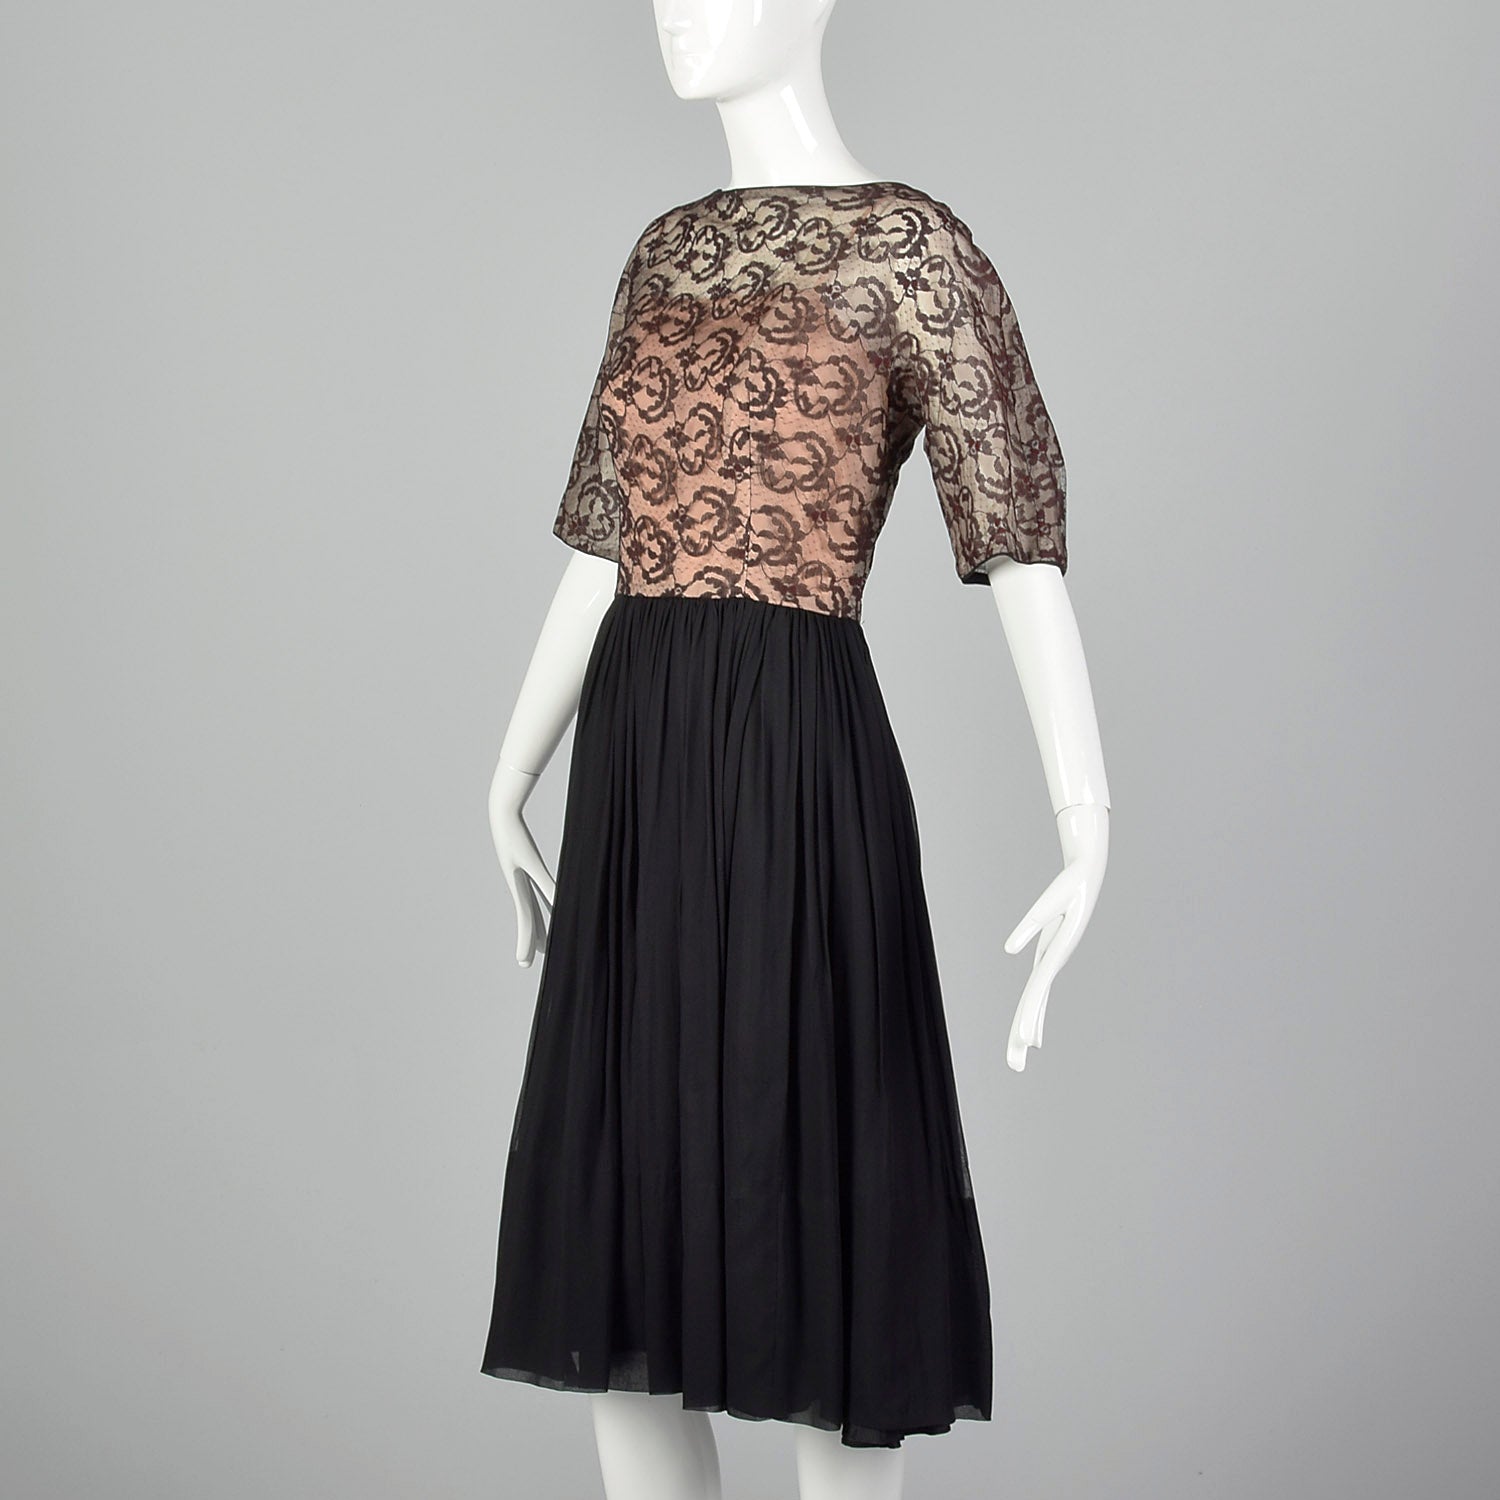 1950s Illusion Bodice Dress with Sheer Lace